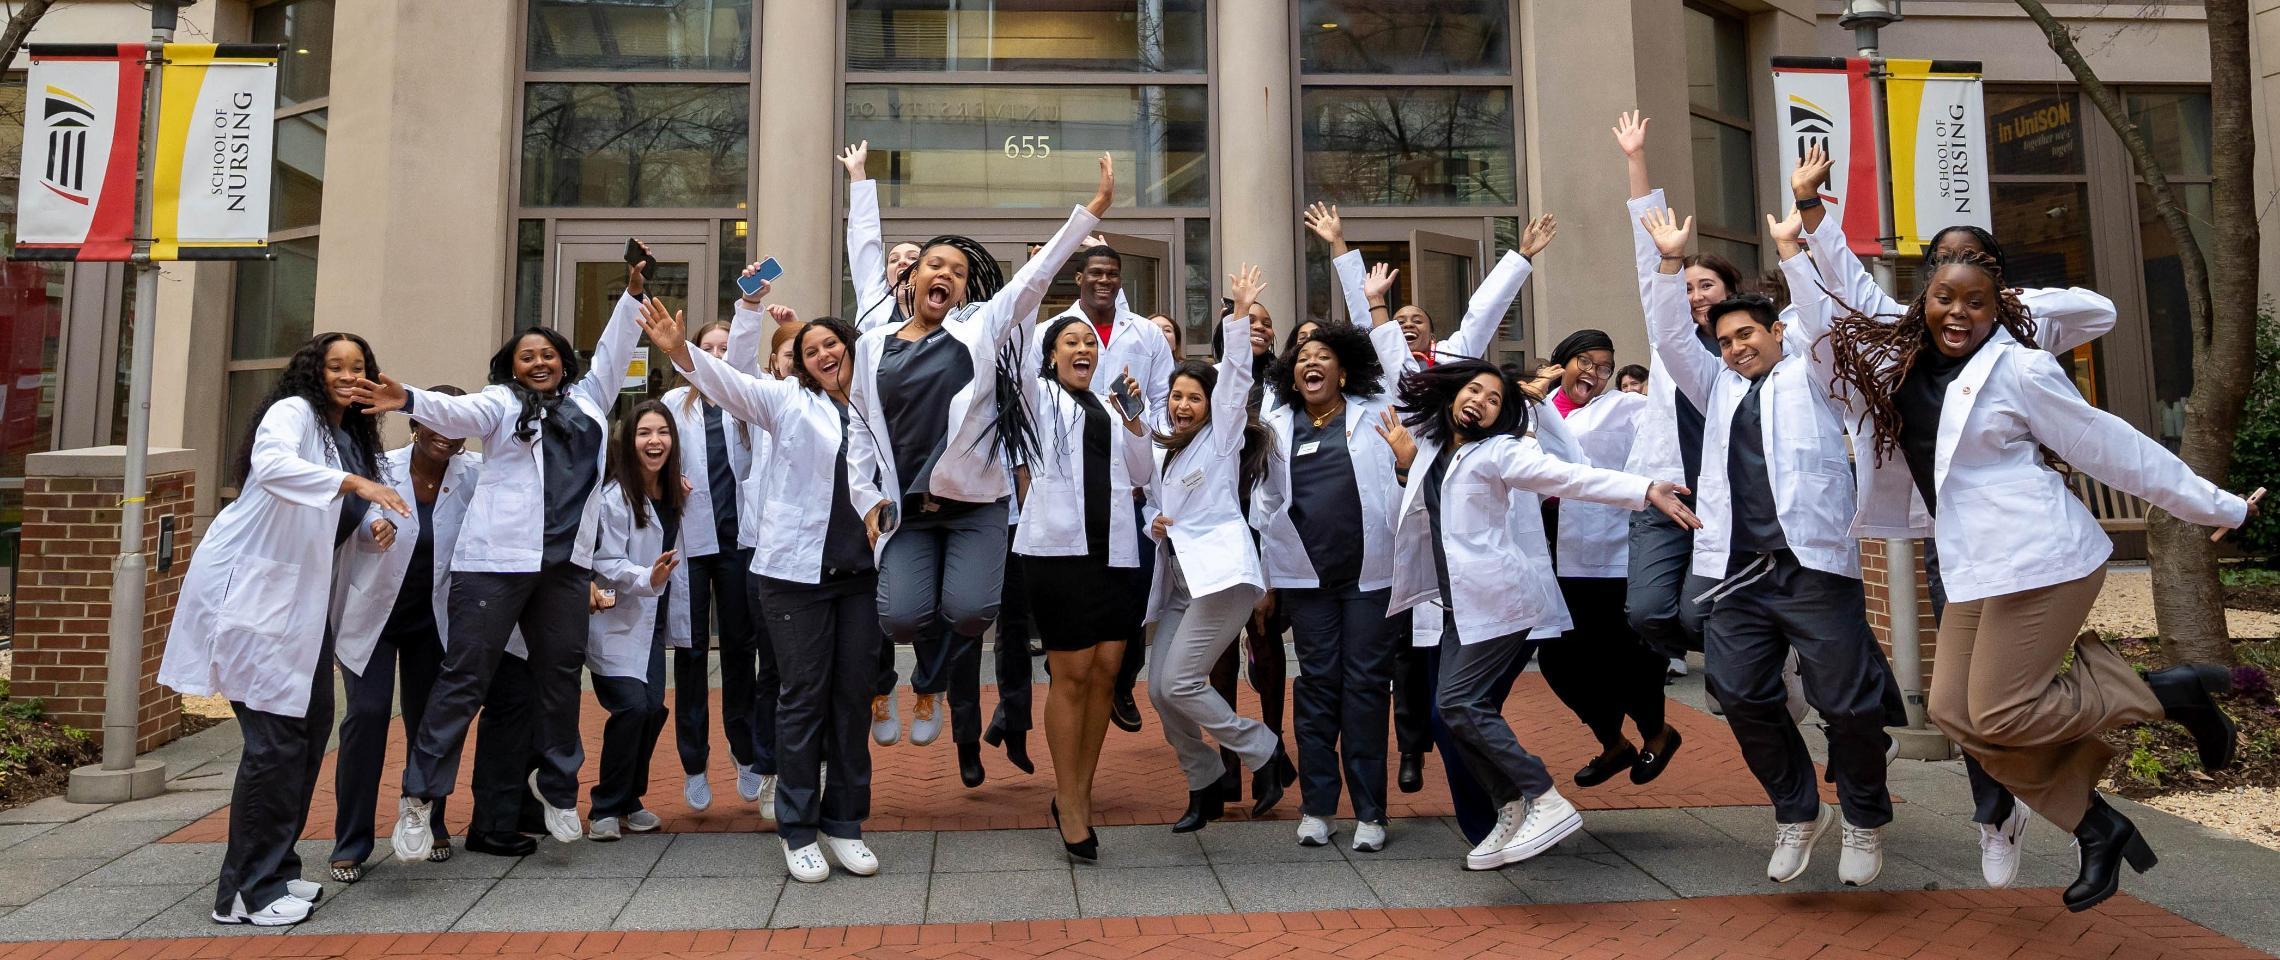 Jump into your nursing career. Join us for our Entry-into-Nursing Online Open Houses (BSN/MSN-E), April 6 in Baltimore and April 13 at USG. Learn more.